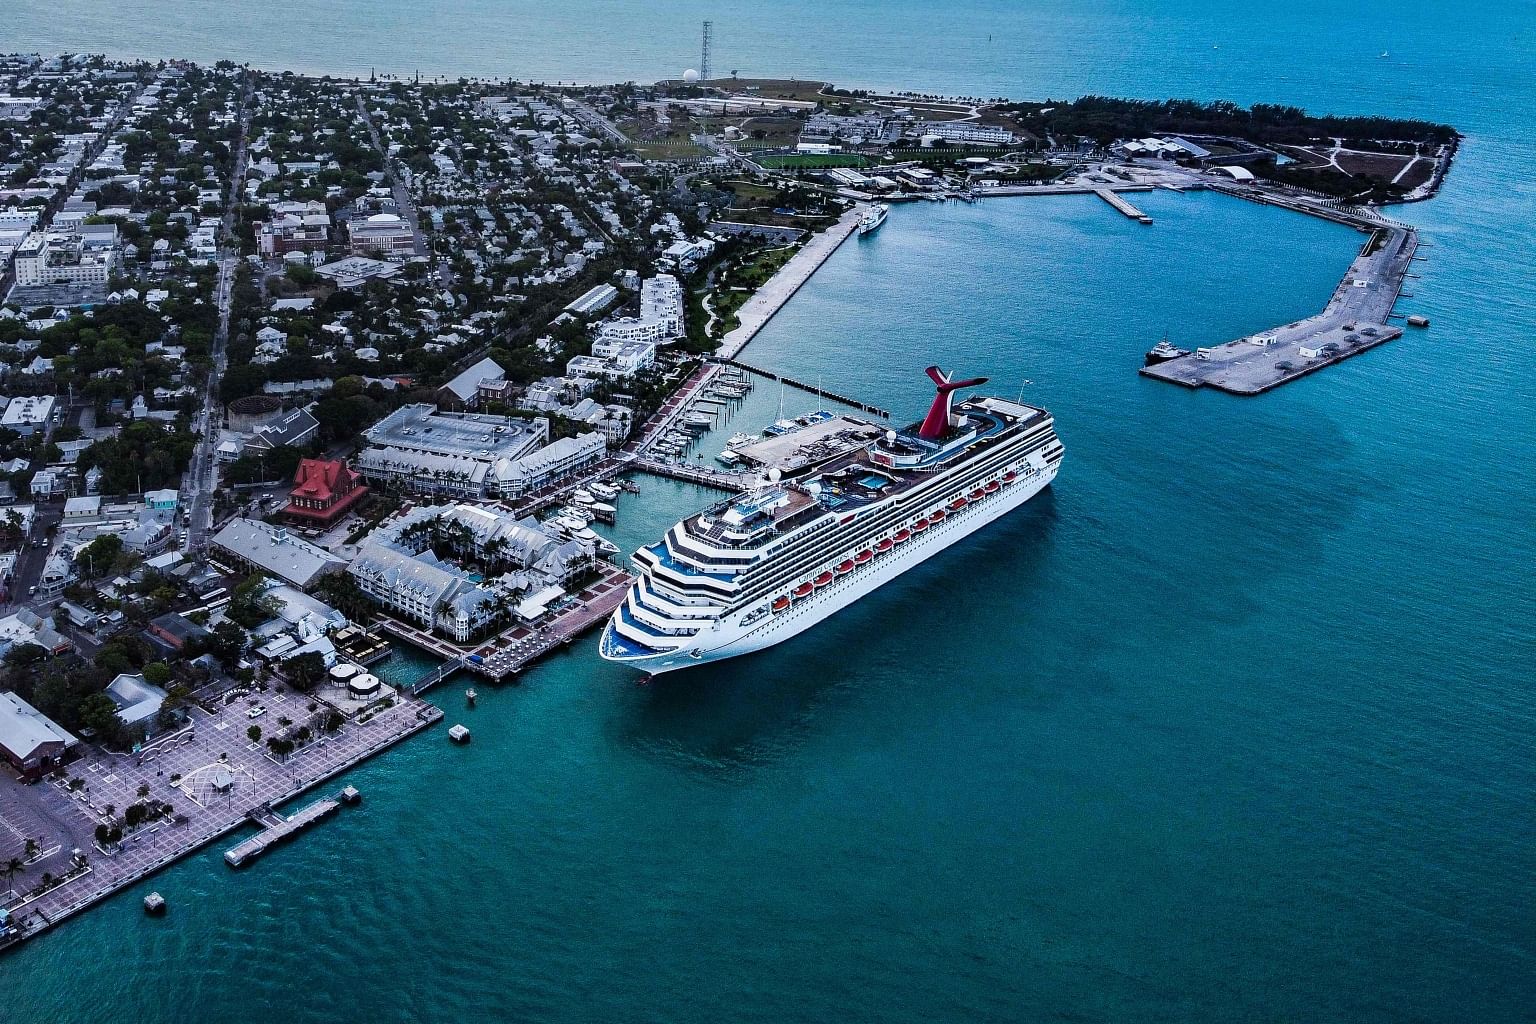 Cruise ships at centre of dispute in Florida's idyllic Key West The